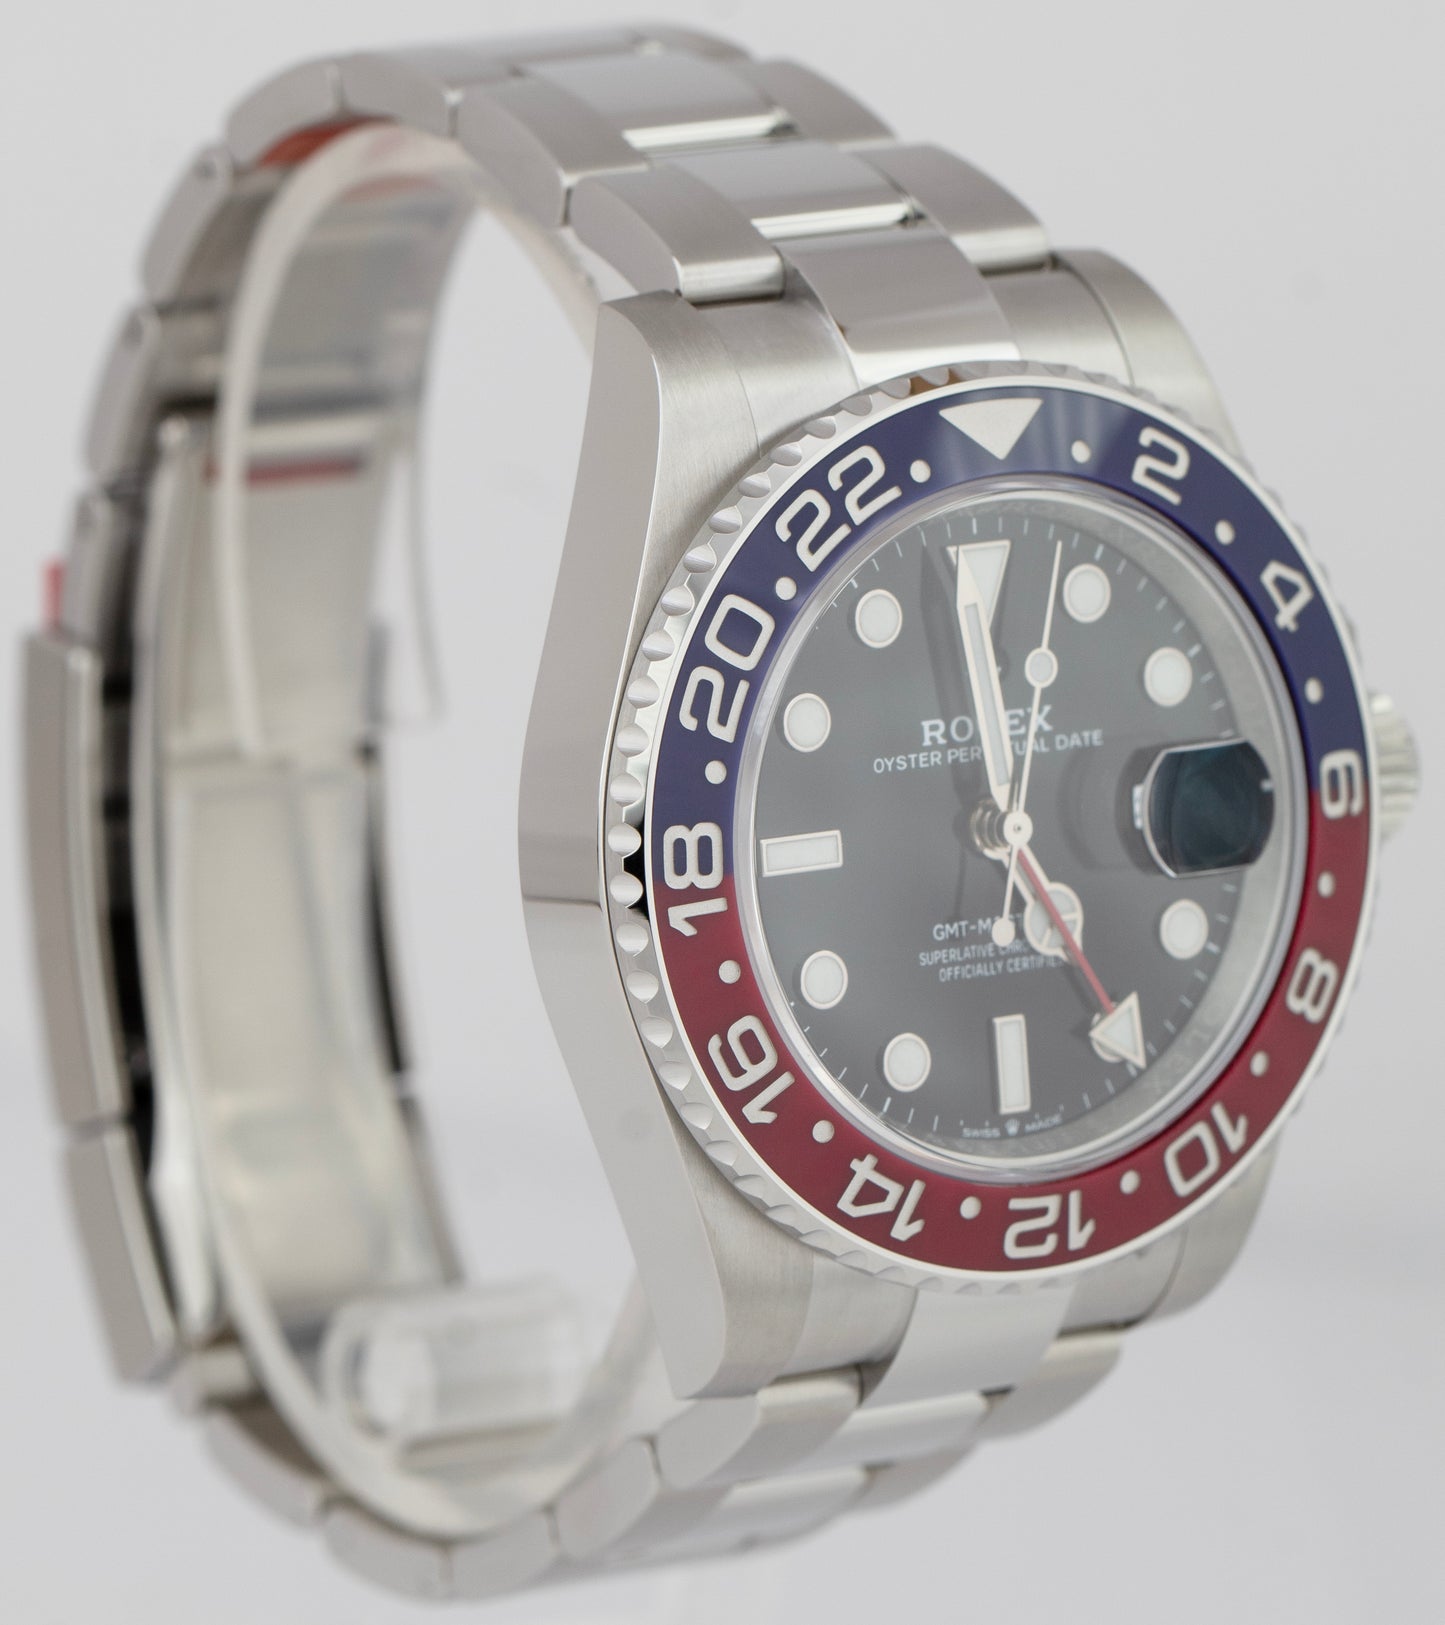 NEW STICKERED PAPERS Rolex GMT-Master II Ceramic PEPSI Oyster 126710 BLRO BOX